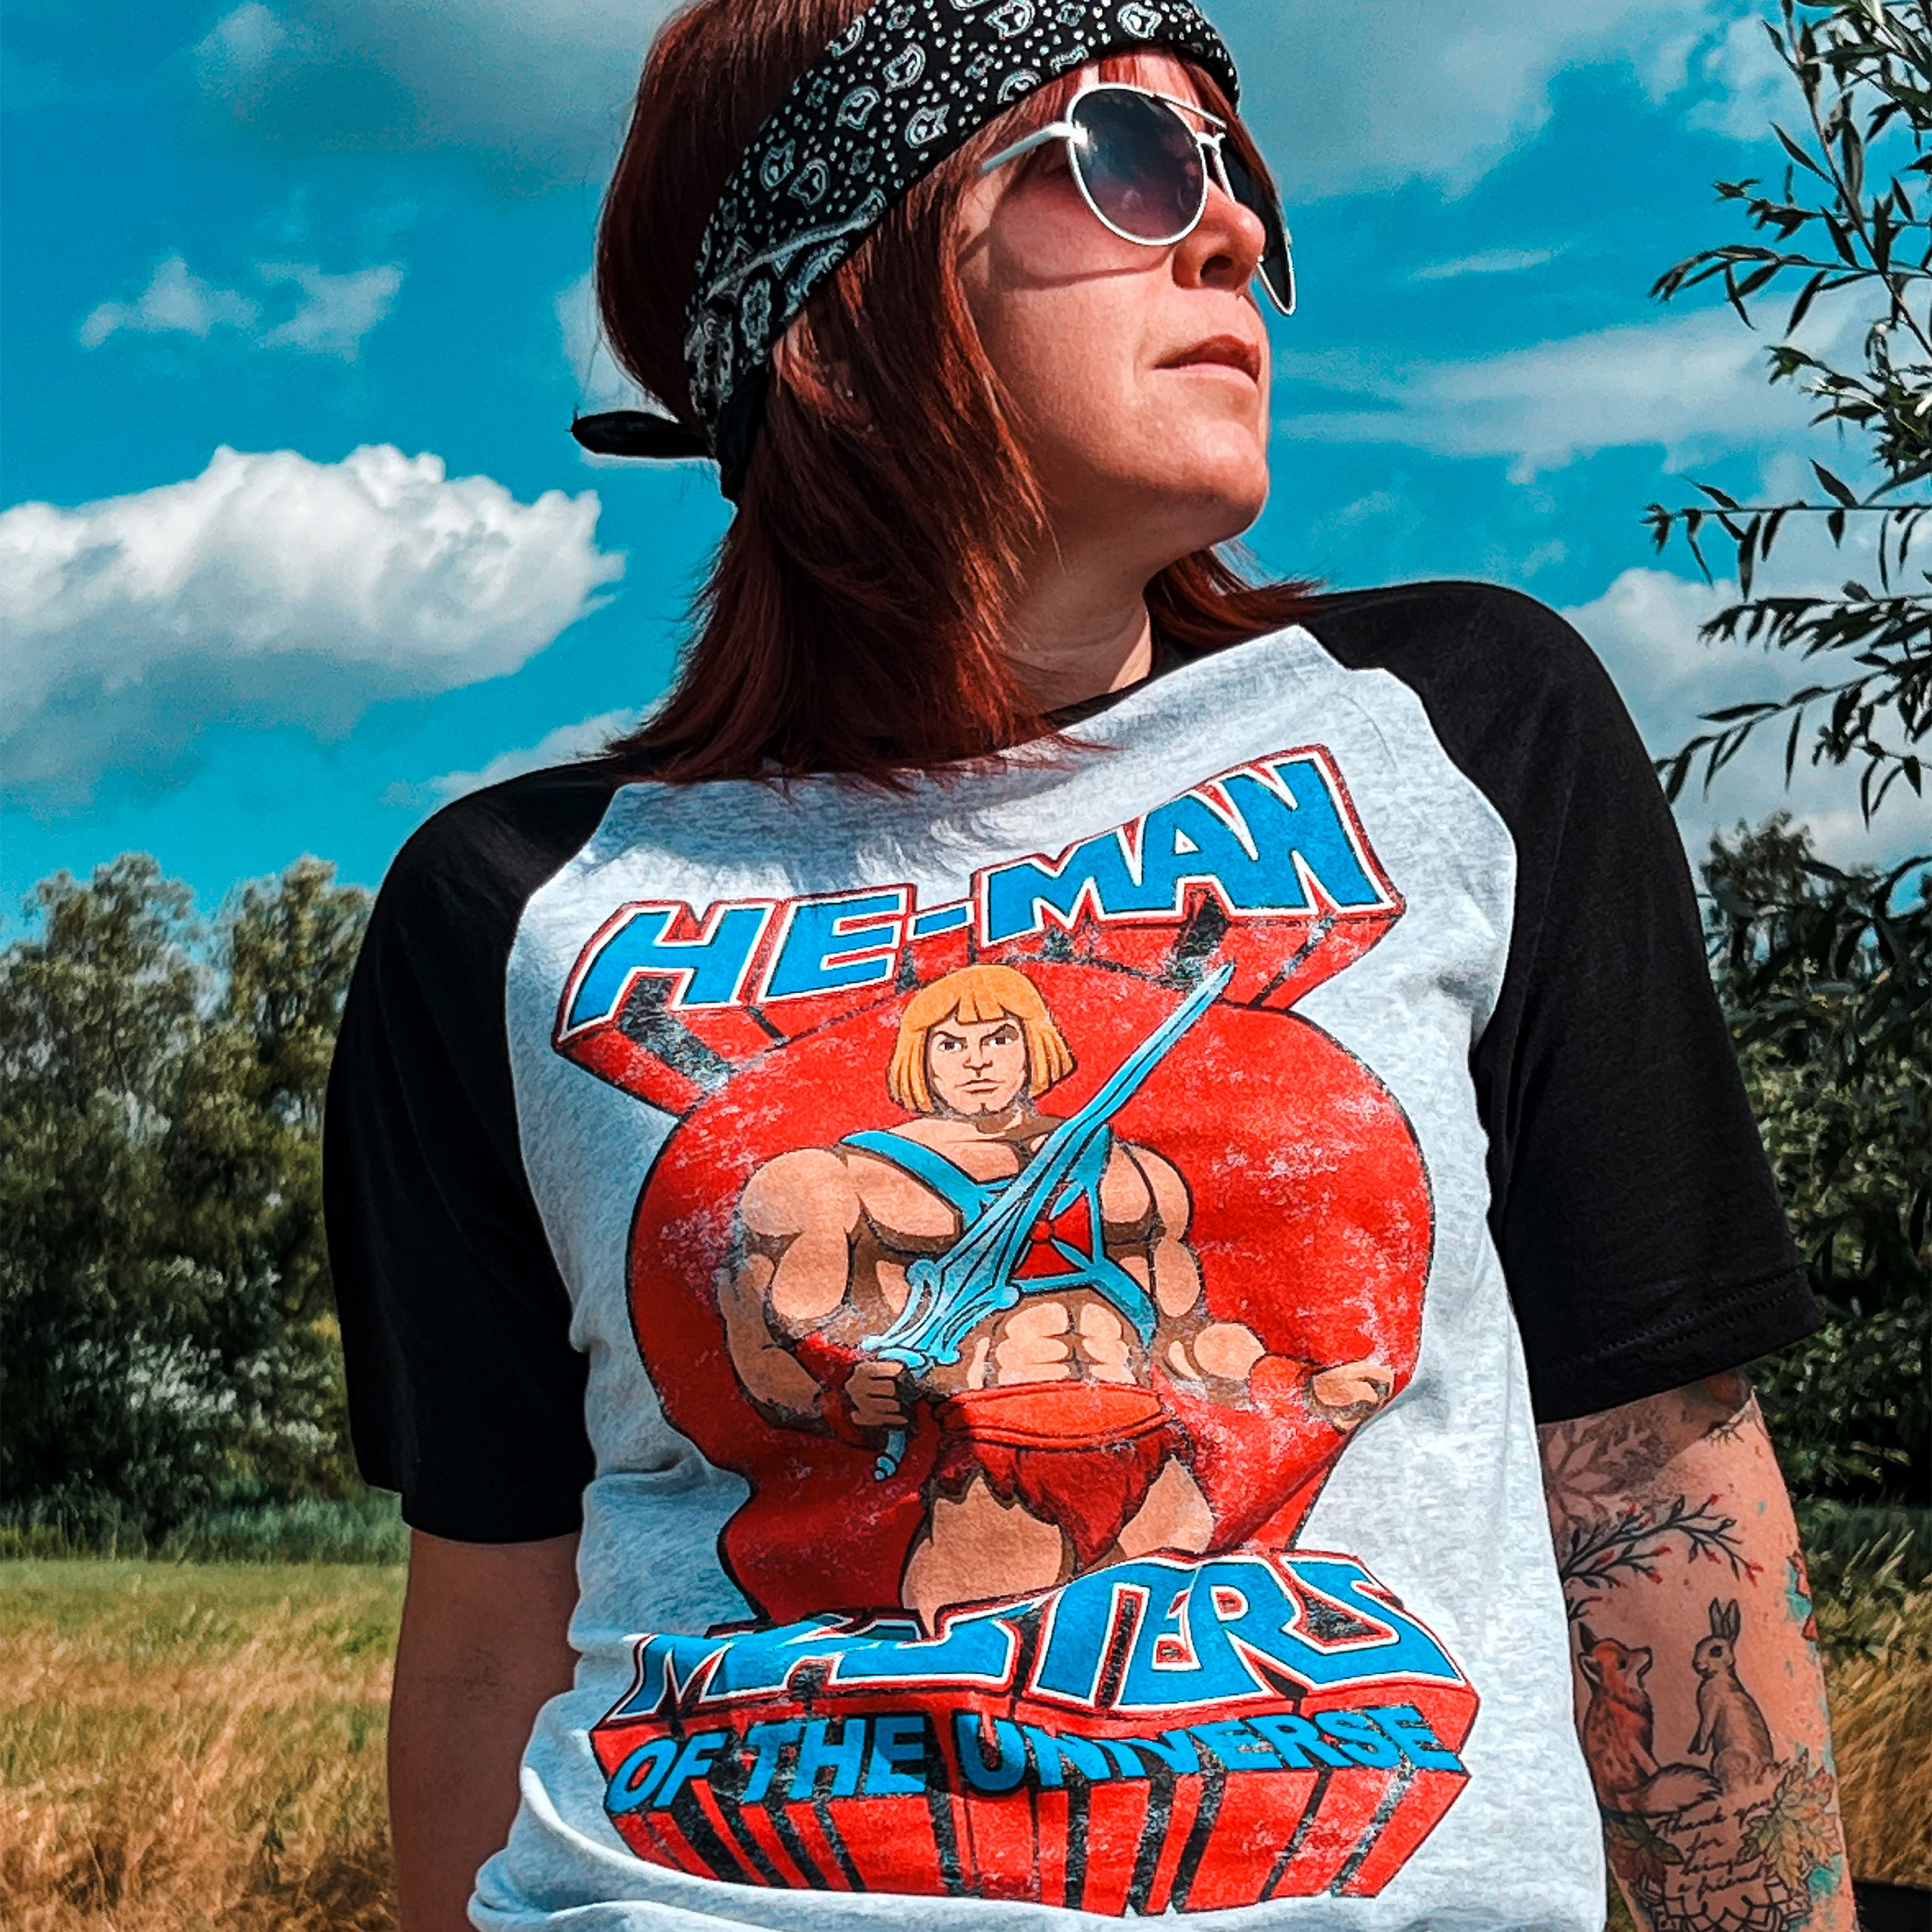 Masters of the Universe - T-shirt He-Man Pose